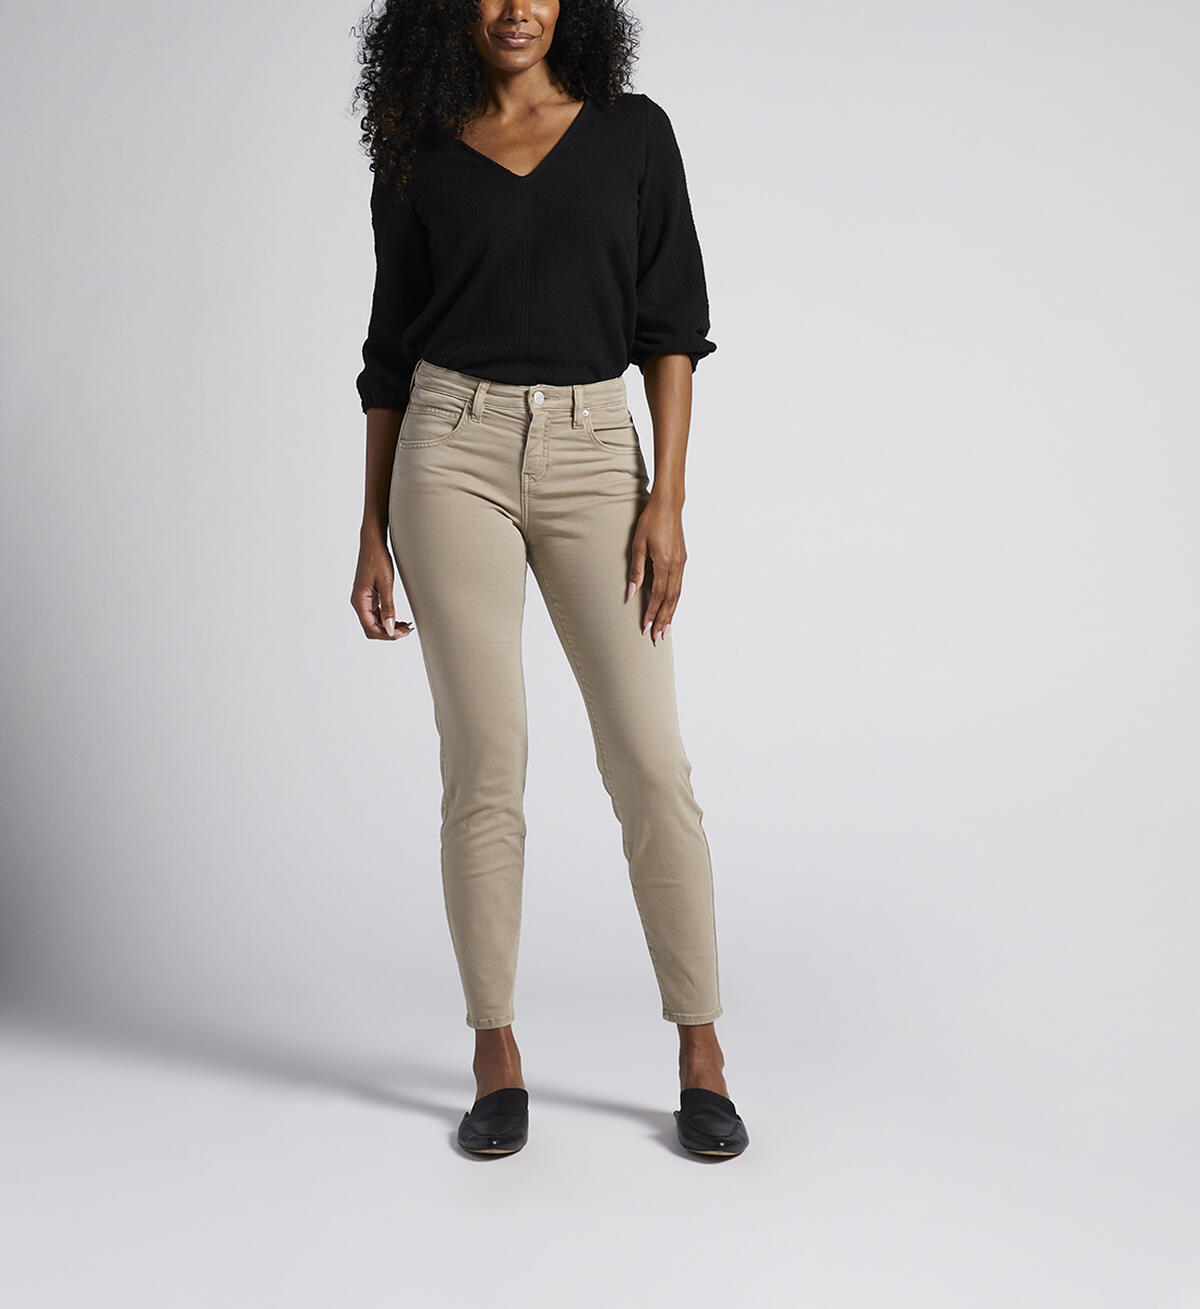 Cecilia Mid Rise Skinny Pants, Taupe, hi-res image number 0